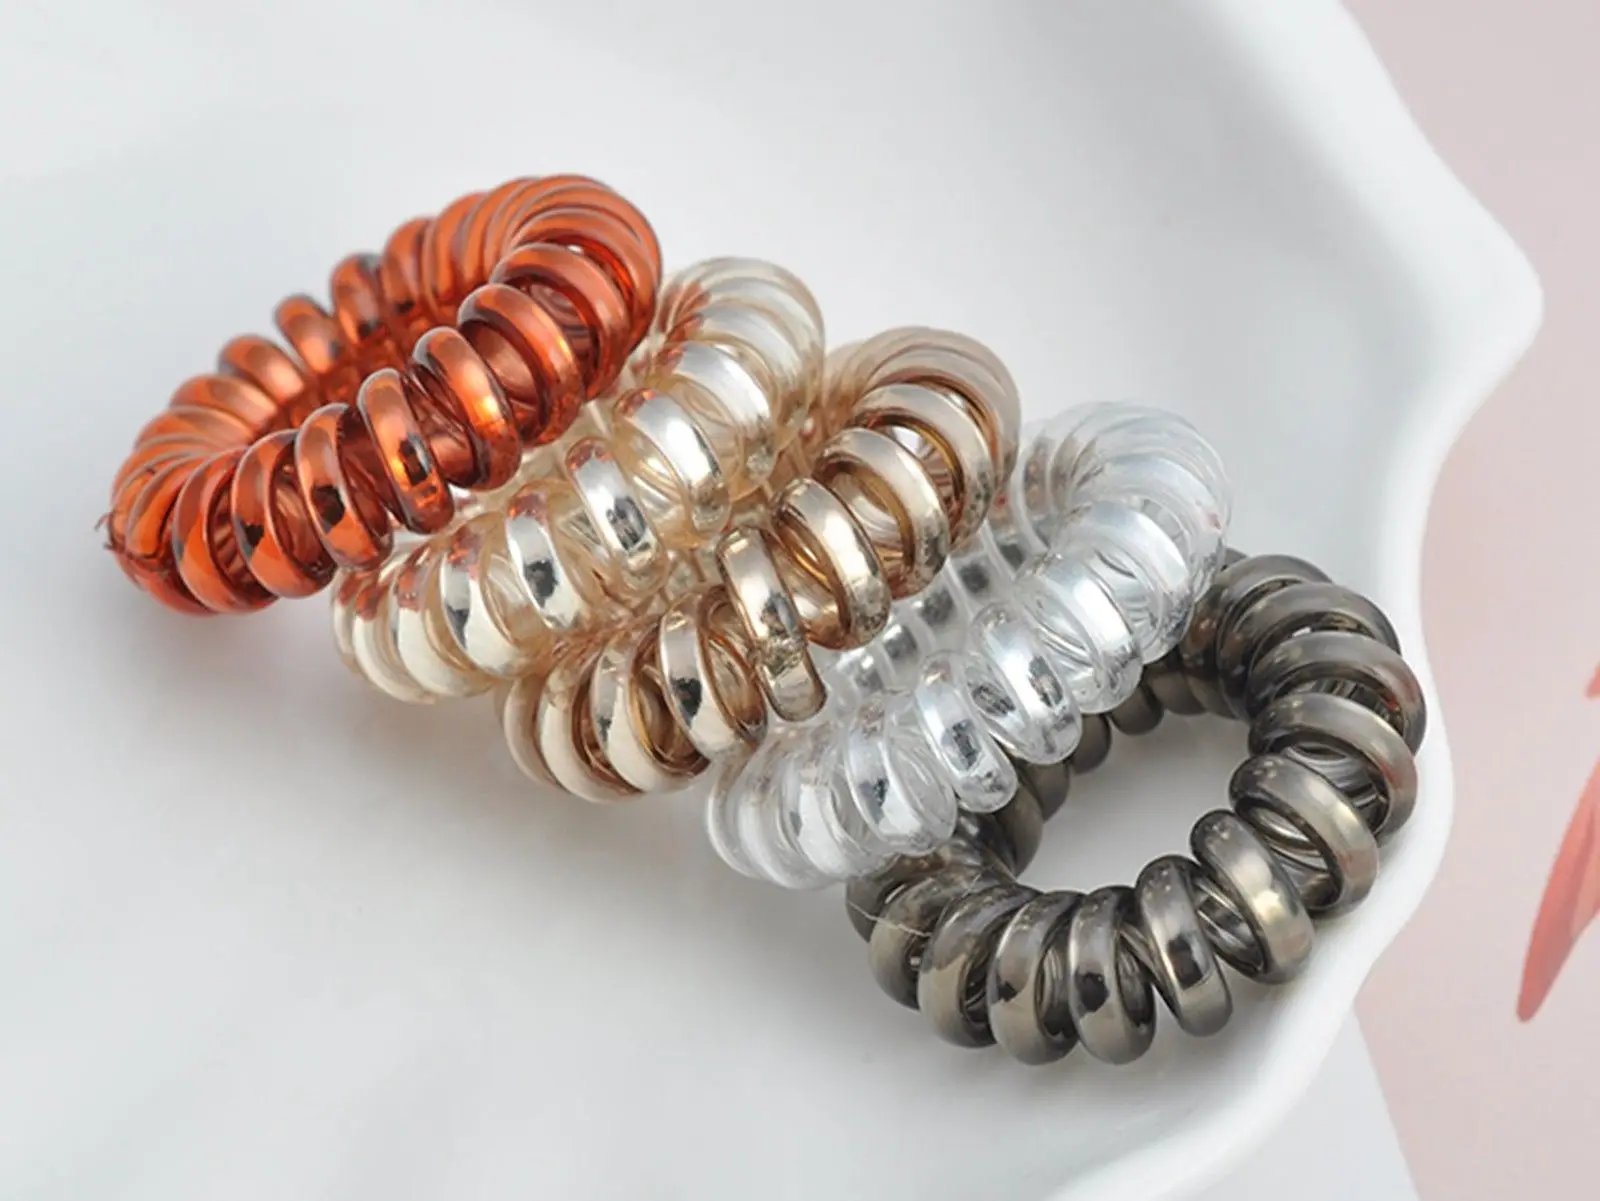 10 Spiral Coil Jelly Elastic Hair Scrunchies Telephone Cord Ponytail Holder 36mm a6 coil notebook spiral notebooks